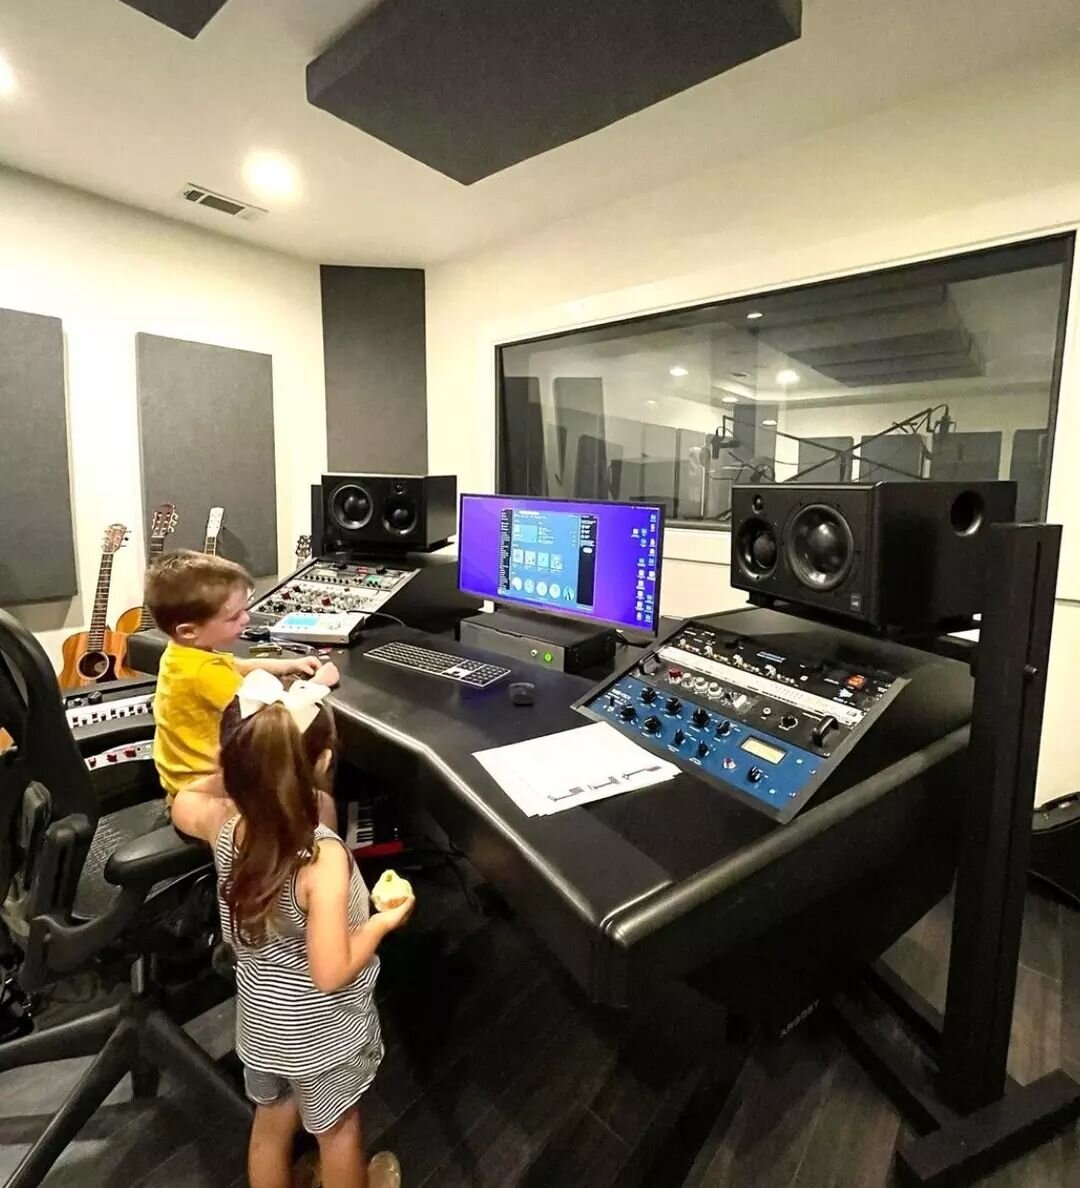 Repost from @producerdanieldennis 

We love hearing about the difference our stands make! Plus the kids are pretty darn cute in this shot!&nbsp;

&quot;Getting my ATCs off the desk and onto these Sound Anchors ADJ2 stands made more of a difference th